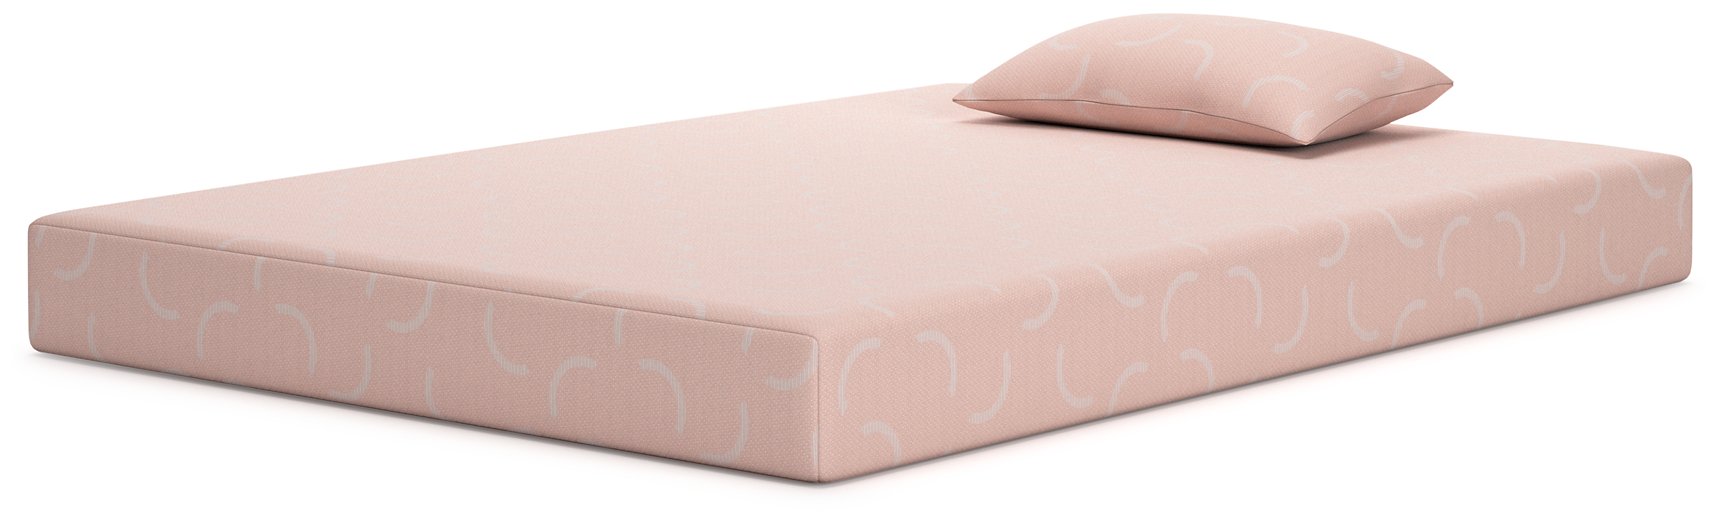 iKidz Coral Mattress and Pillow - Home And Beyond